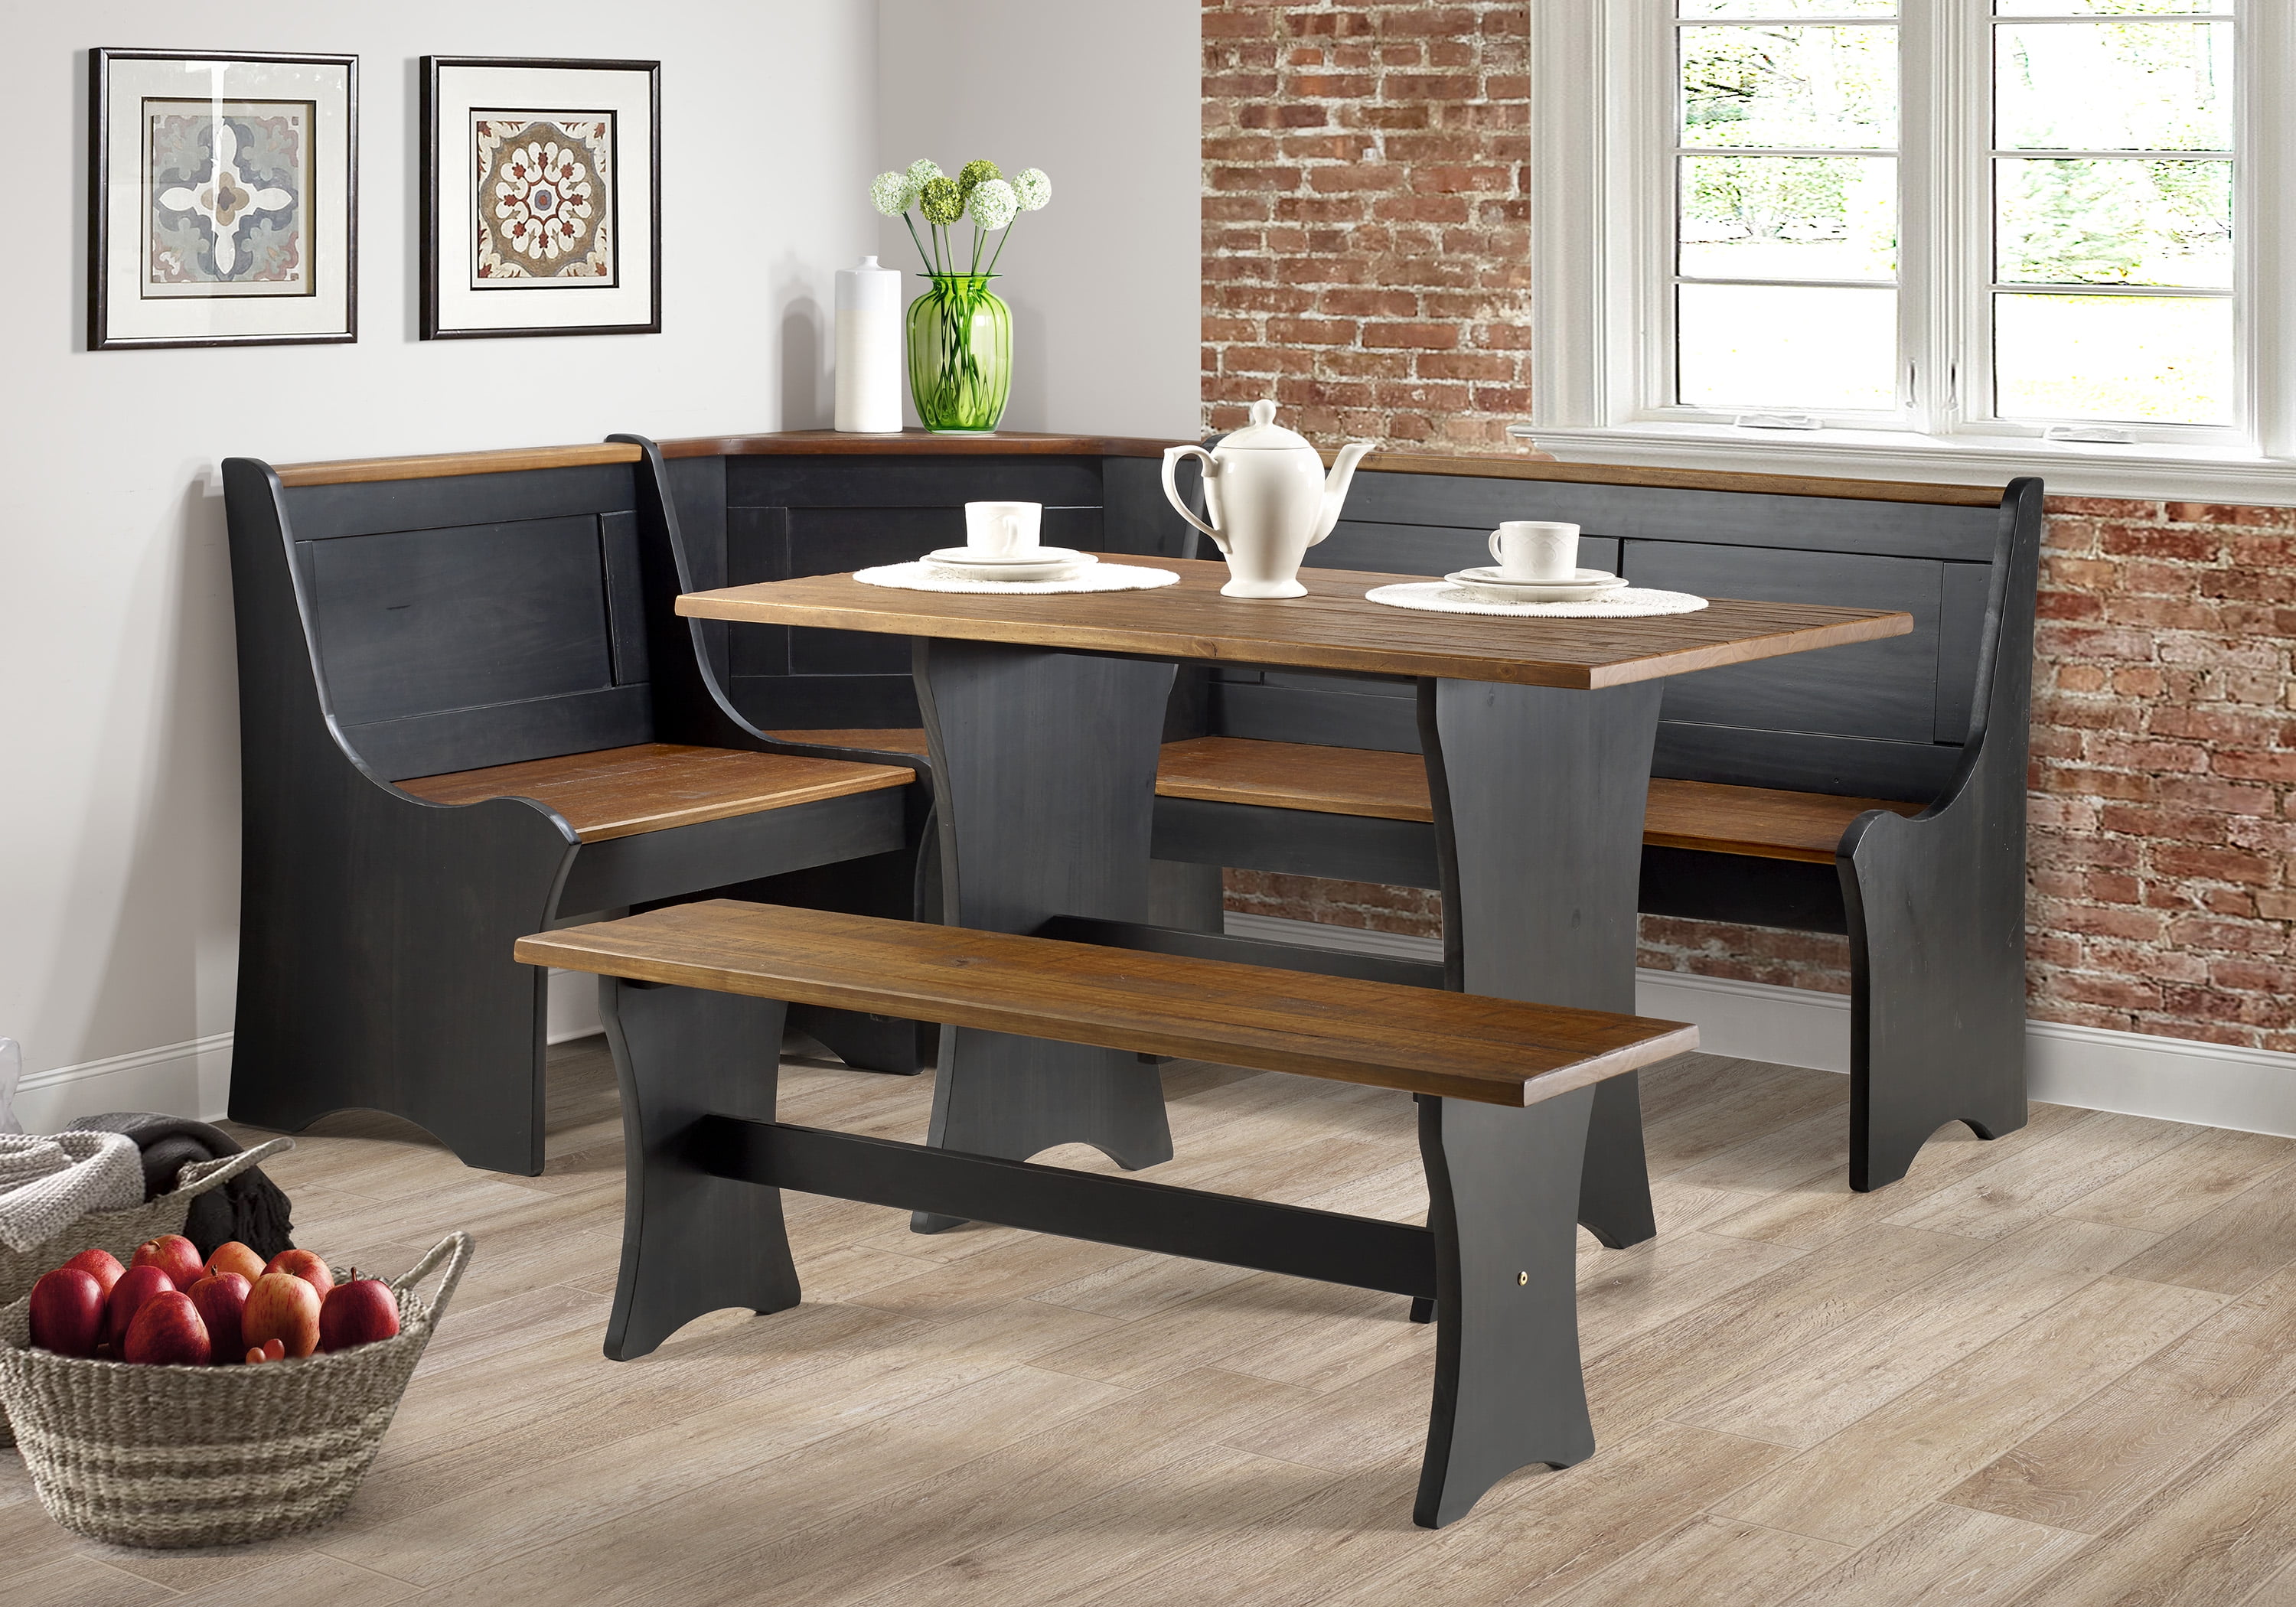 Kitchen Dining Corner Seating Bench Table With Storage : Bench Table ...